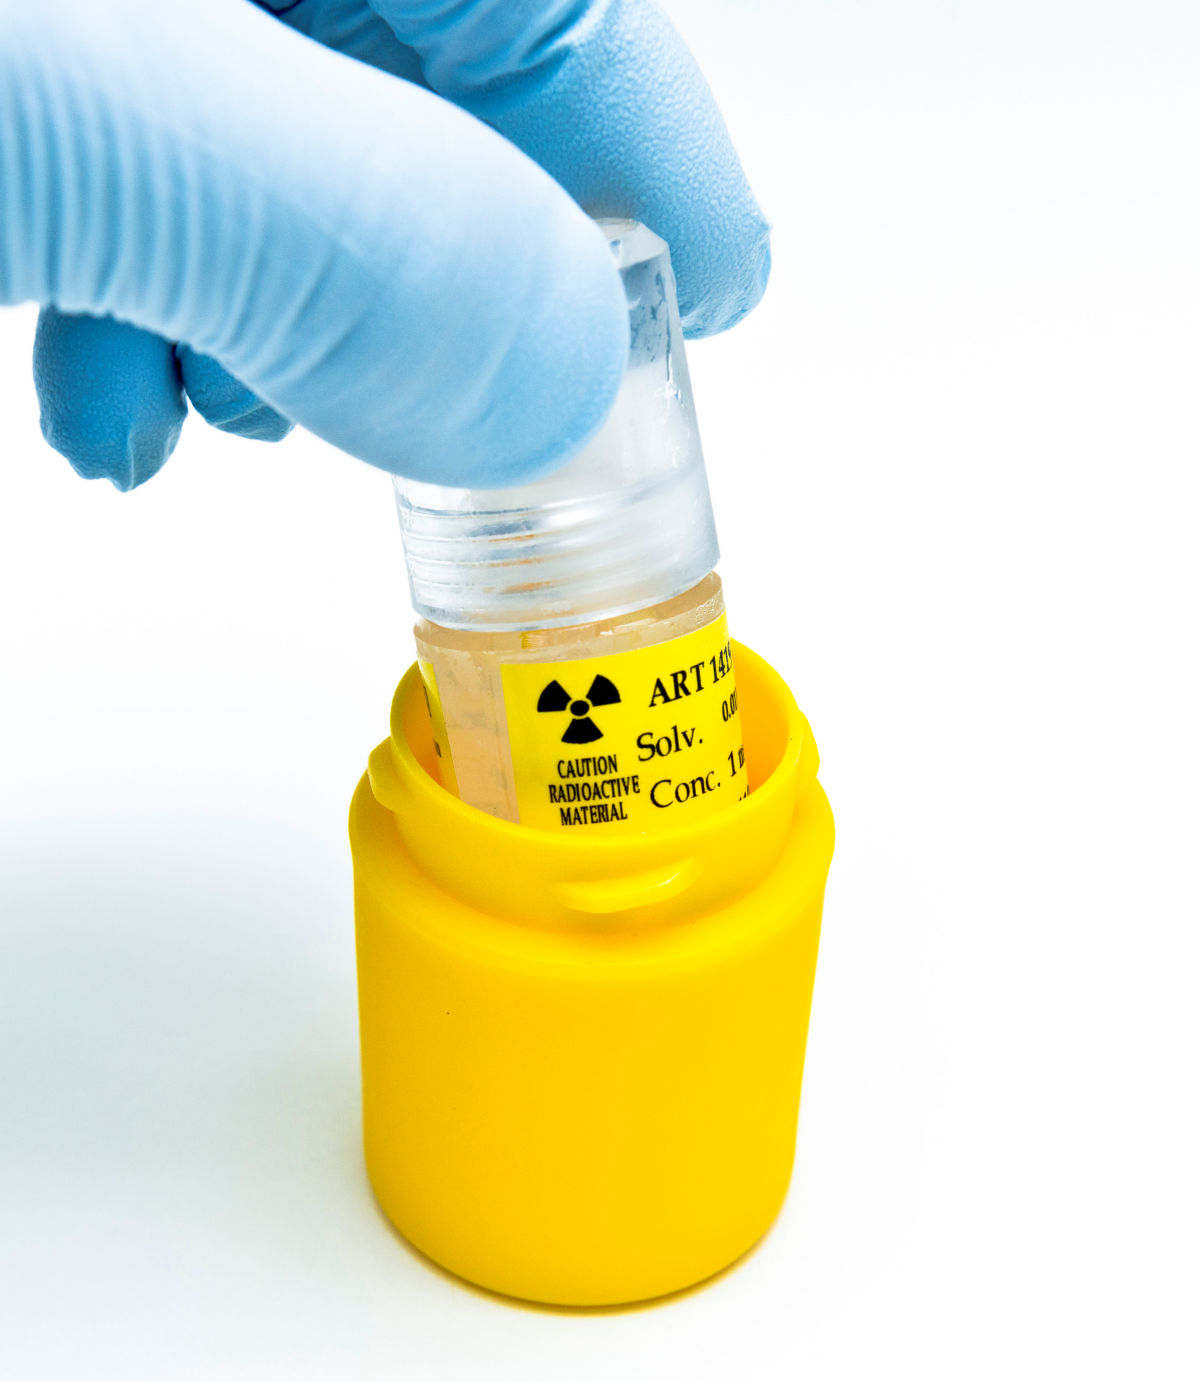 Tracking an open source radioactive substance in a lab